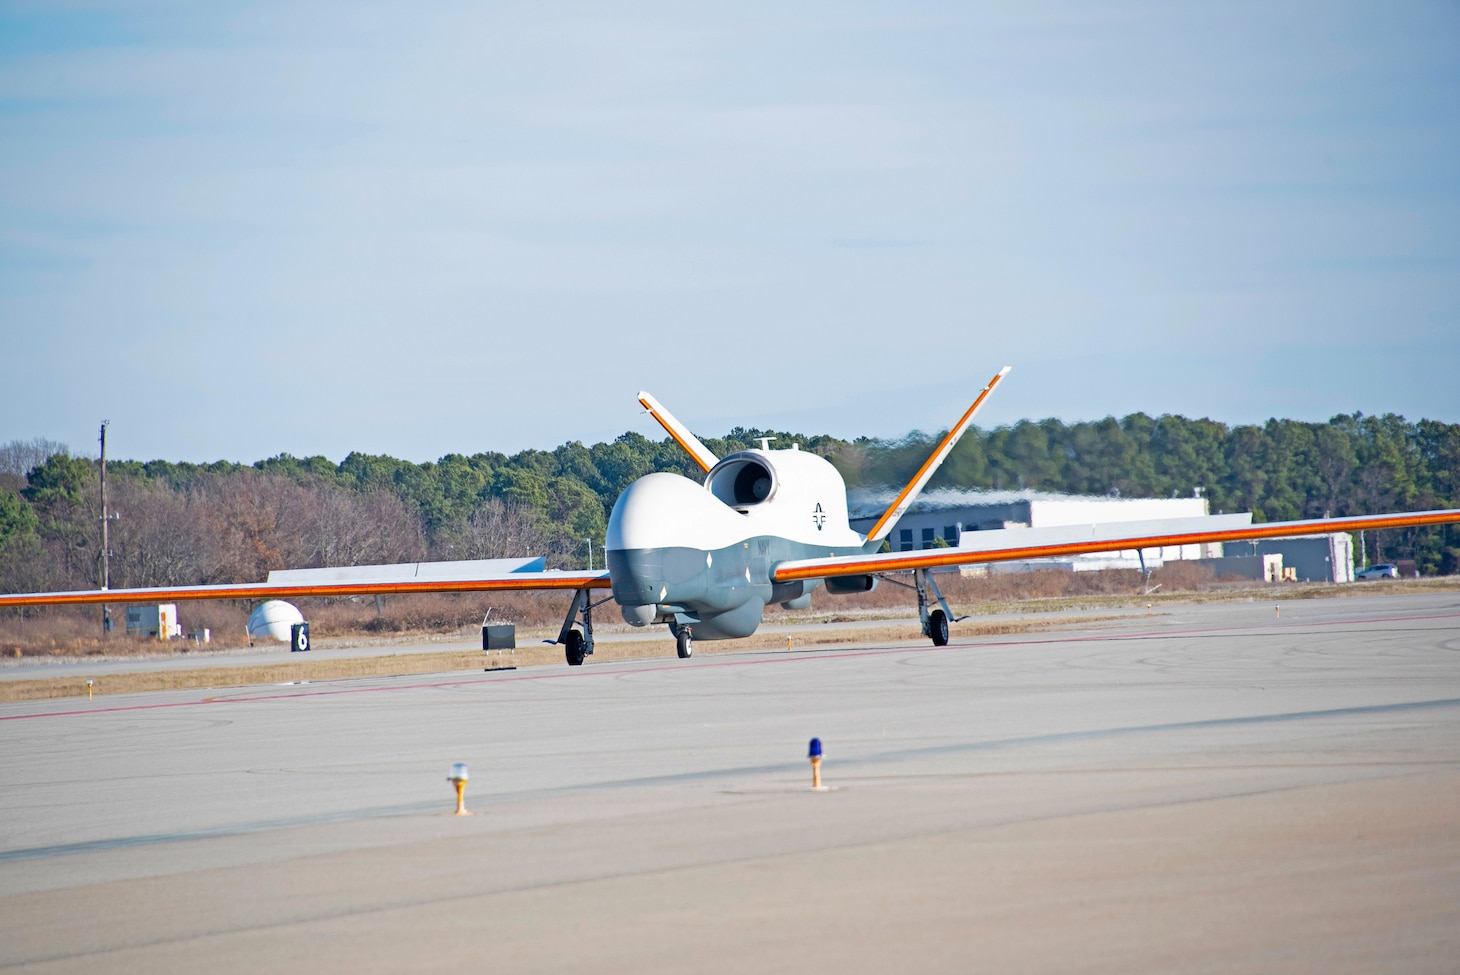 An MQ-4C Triton prepares for its initial flight to assess the unmanned aircraft system’s ability to fly with ice wing accumulation Jan. 25 at Naval Air Station Patuxent River, Maryland.